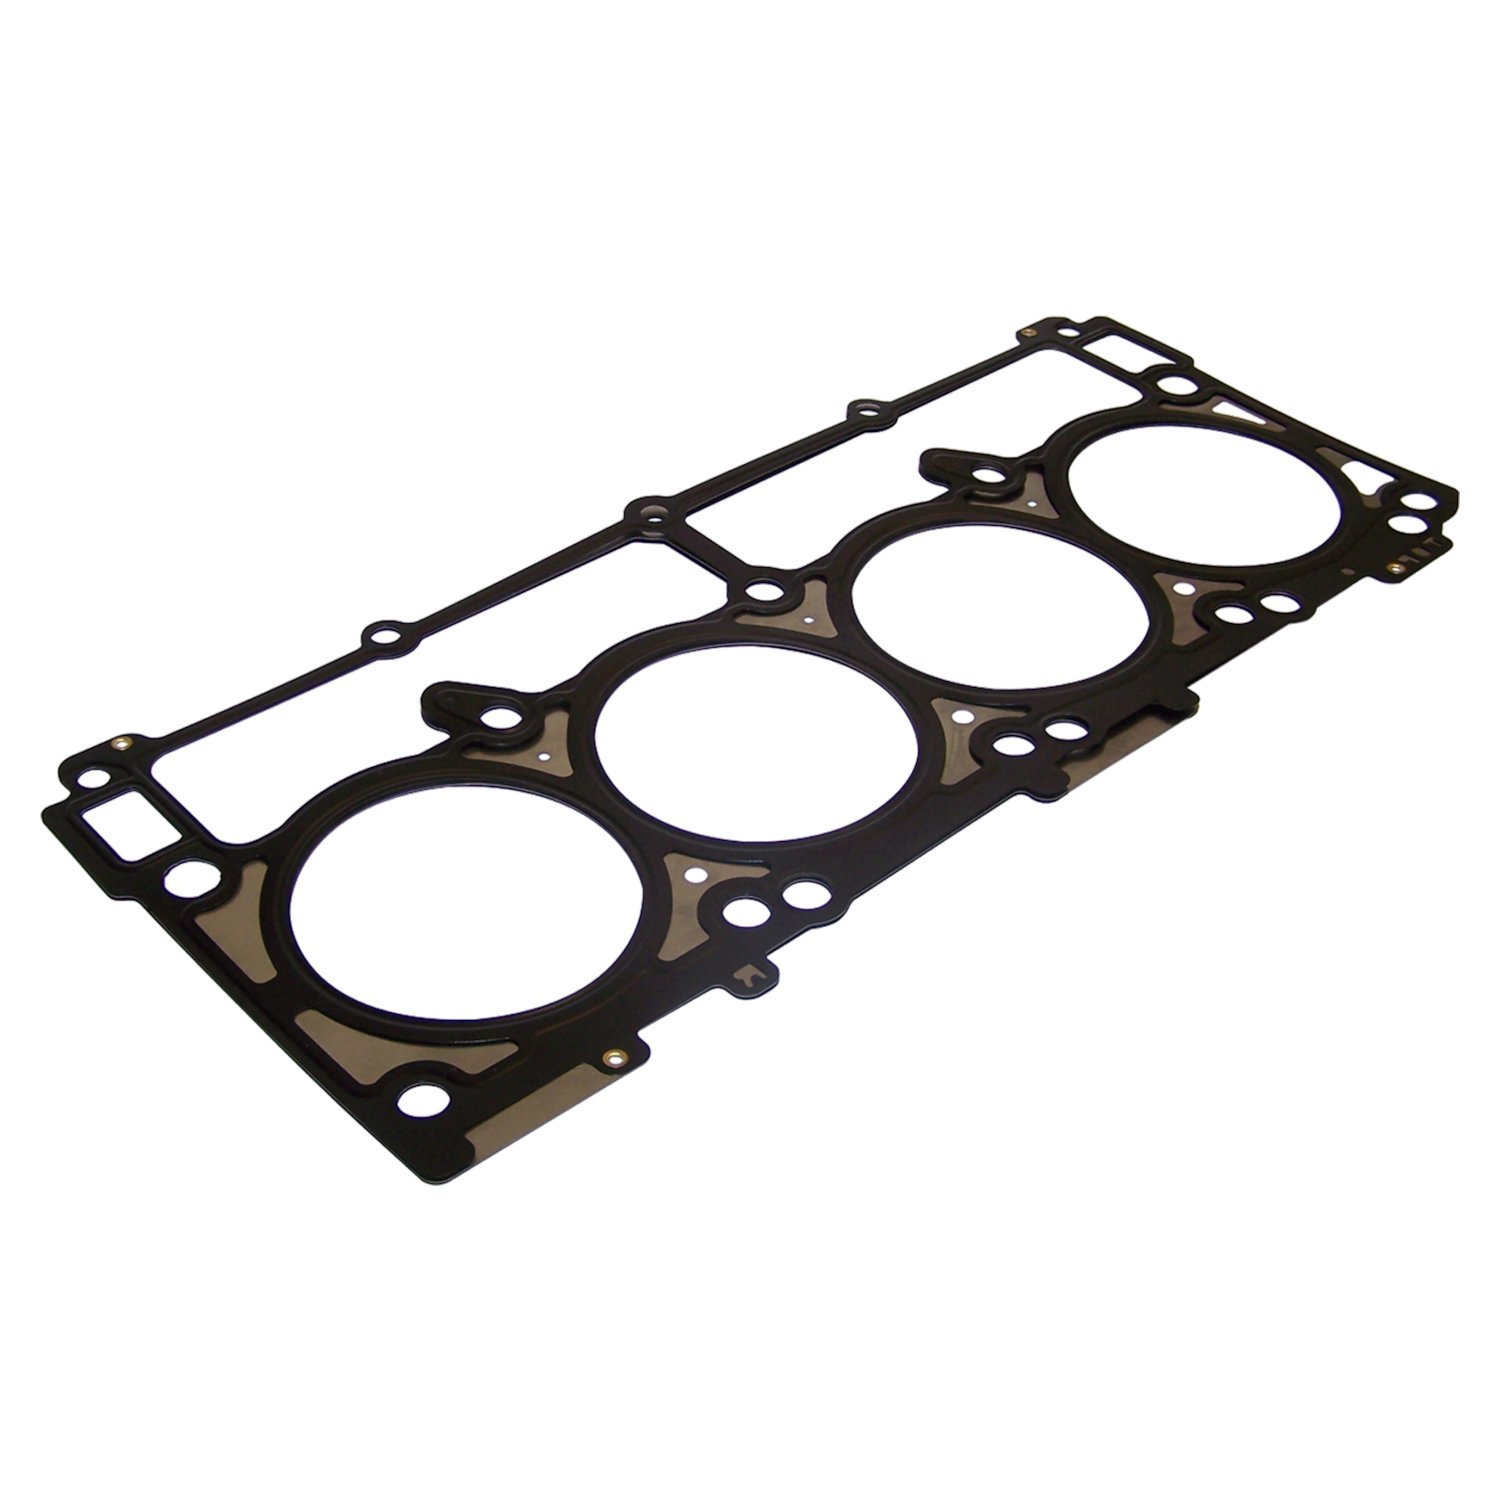 Right Cylinder Head Gasket for Multiple 2004-08 J/D/C/R Vehicles w/ 5.7L Engine